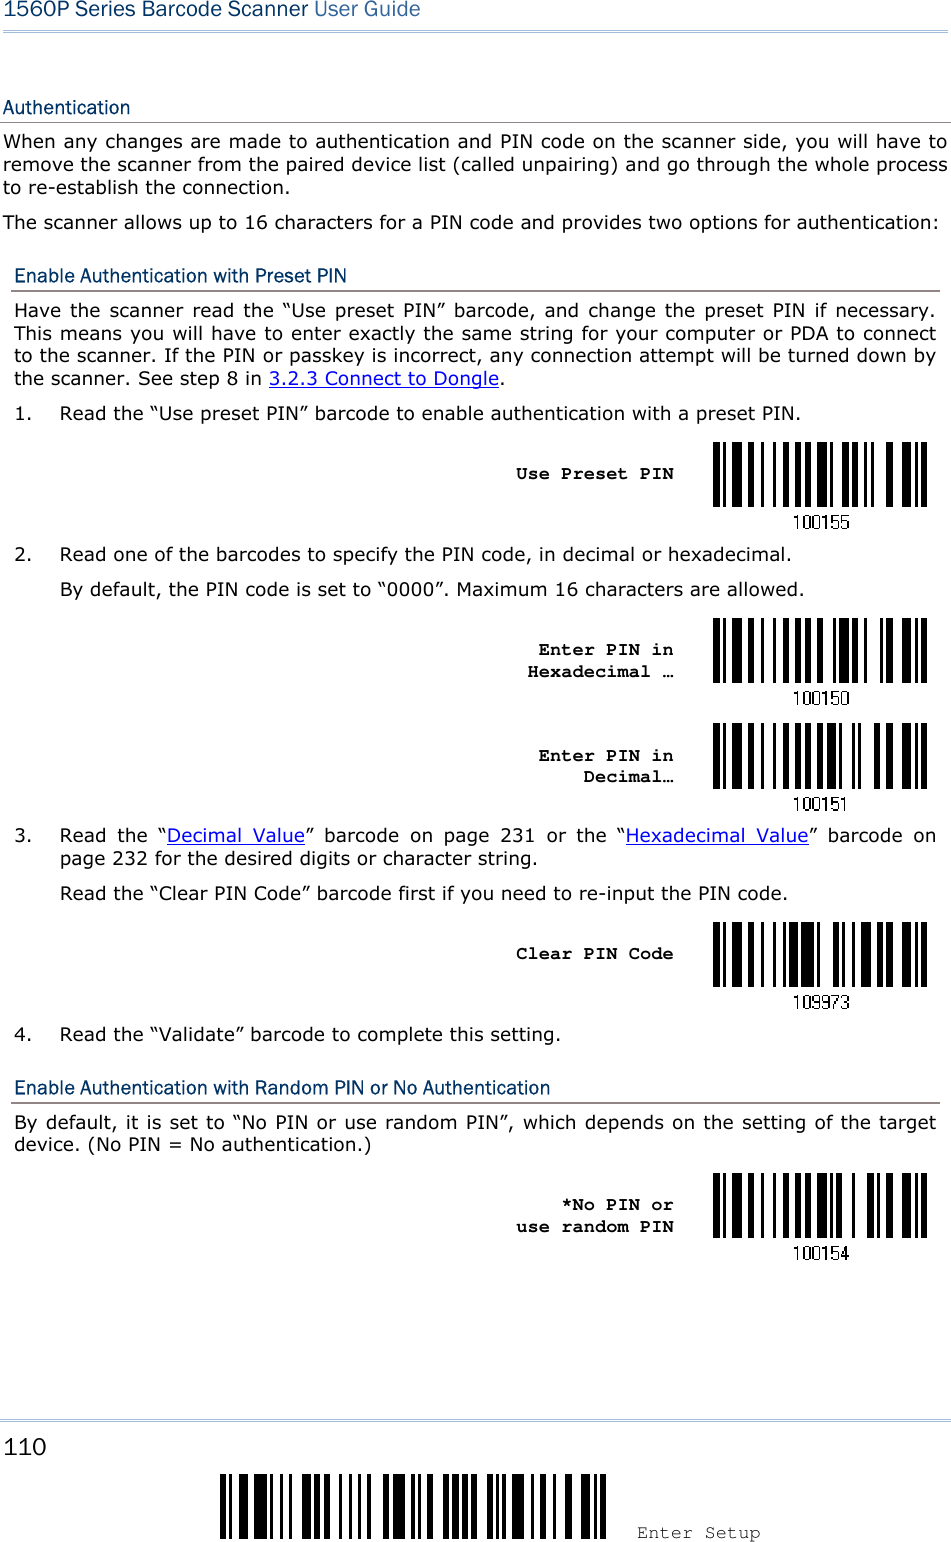 110 Enter Setup 1560P Series Barcode Scanner User Guide Authentication When any changes are made to authentication and PIN code on the scanner side, you will have to remove the scanner from the paired device list (called unpairing) and go through the whole process to re-establish the connection. The scanner allows up to 16 characters for a PIN code and provides two options for authentication: Enable Authentication with Preset PIN Have the  scanner  read the “Use  preset  PIN” barcode, and  change the preset PIN  if  necessary. This means you will have to enter exactly the same string for your computer or PDA to connect to the scanner. If the PIN or passkey is incorrect, any connection attempt will be turned down by the scanner. See step 8 in 3.2.3 Connect to Dongle. 1. Read the “Use preset PIN” barcode to enable authentication with a preset PIN.Use Preset PIN 2. Read one of the barcodes to specify the PIN code, in decimal or hexadecimal.By default, the PIN code is set to “0000”. Maximum 16 characters are allowed.Enter PIN in Hexadecimal … Enter PIN in Decimal… 3. Read  the  “Decimal  Value”  barcode  on  page  231  or  the  “Hexadecimal  Value”  barcode  onpage 232 for the desired digits or character string.Read the “Clear PIN Code” barcode first if you need to re-input the PIN code.Clear PIN Code 4. Read the “Validate” barcode to complete this setting.Enable Authentication with Random PIN or No Authentication By default, it is set to “No PIN or use random PIN”, which depends on the setting of the target device. (No PIN = No authentication.) *No PIN oruse random PIN 